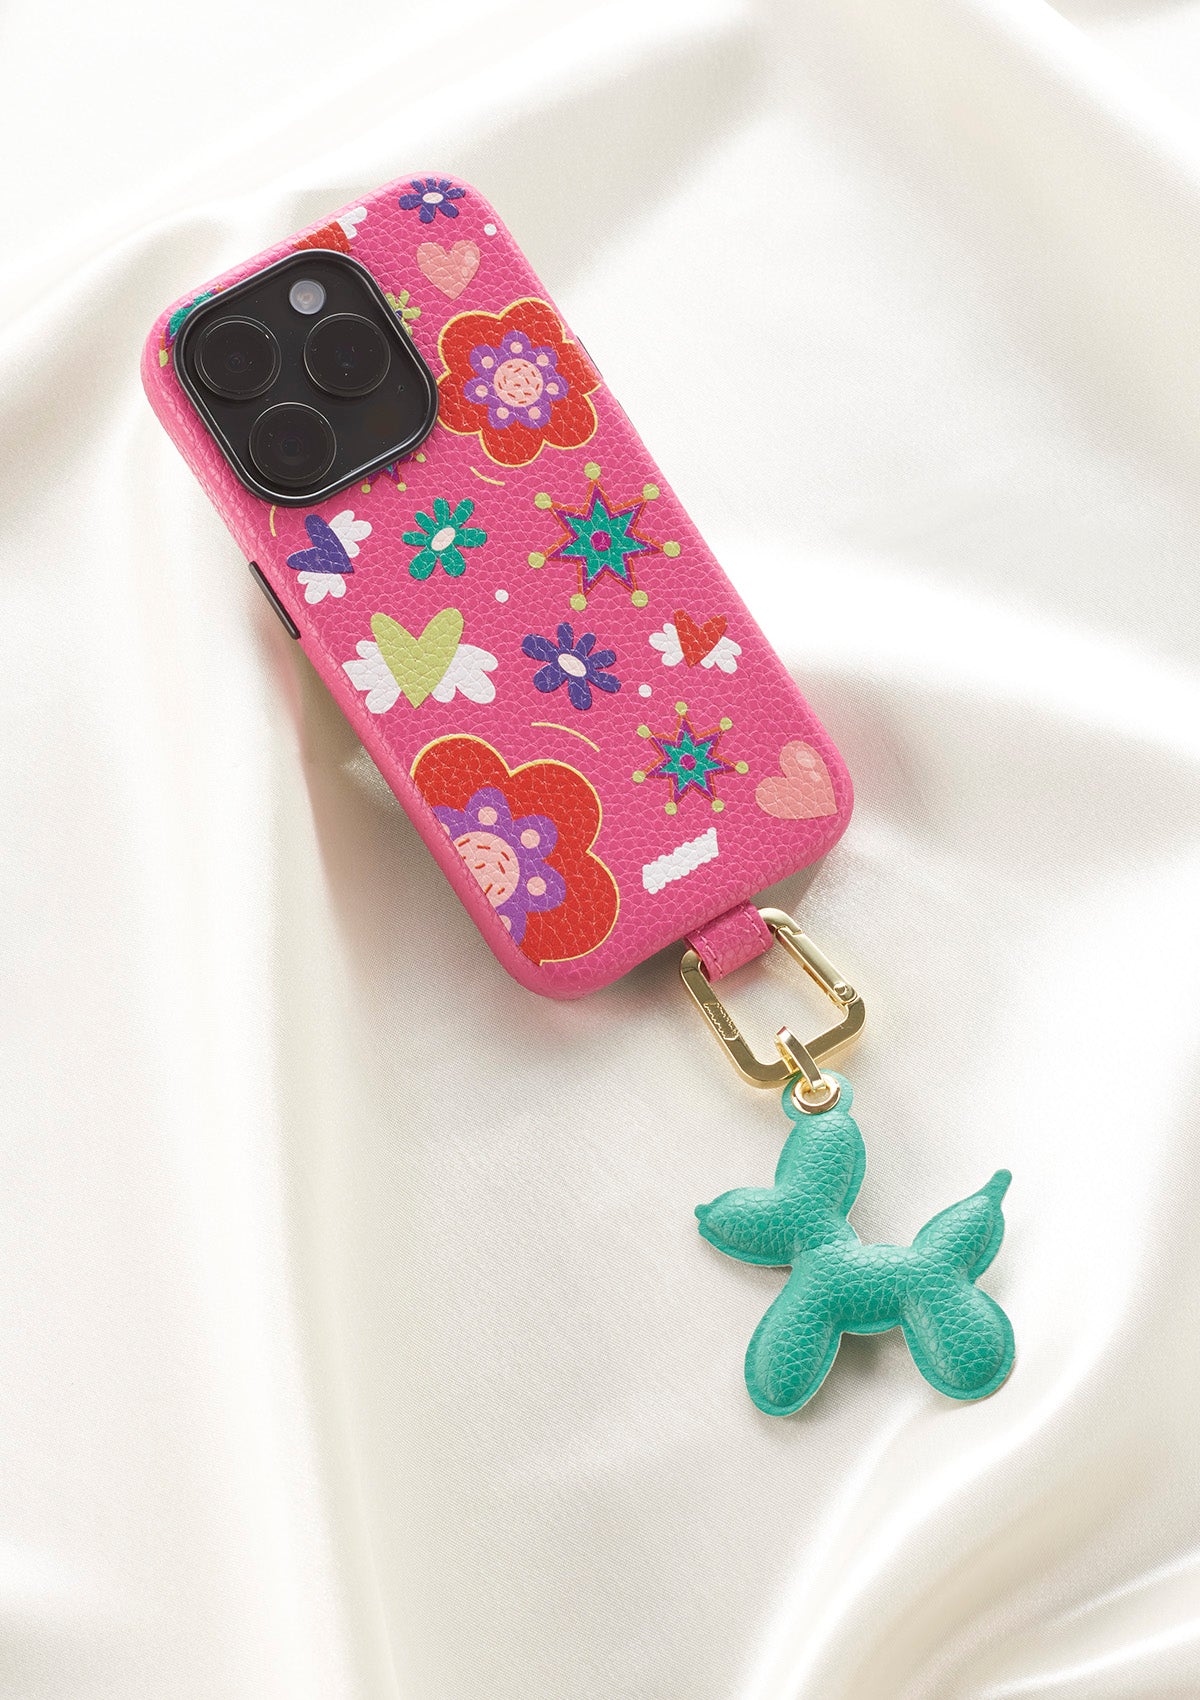  cover_iphone_untags_BackTo70_rosa_Phone_Charm_cane_verde